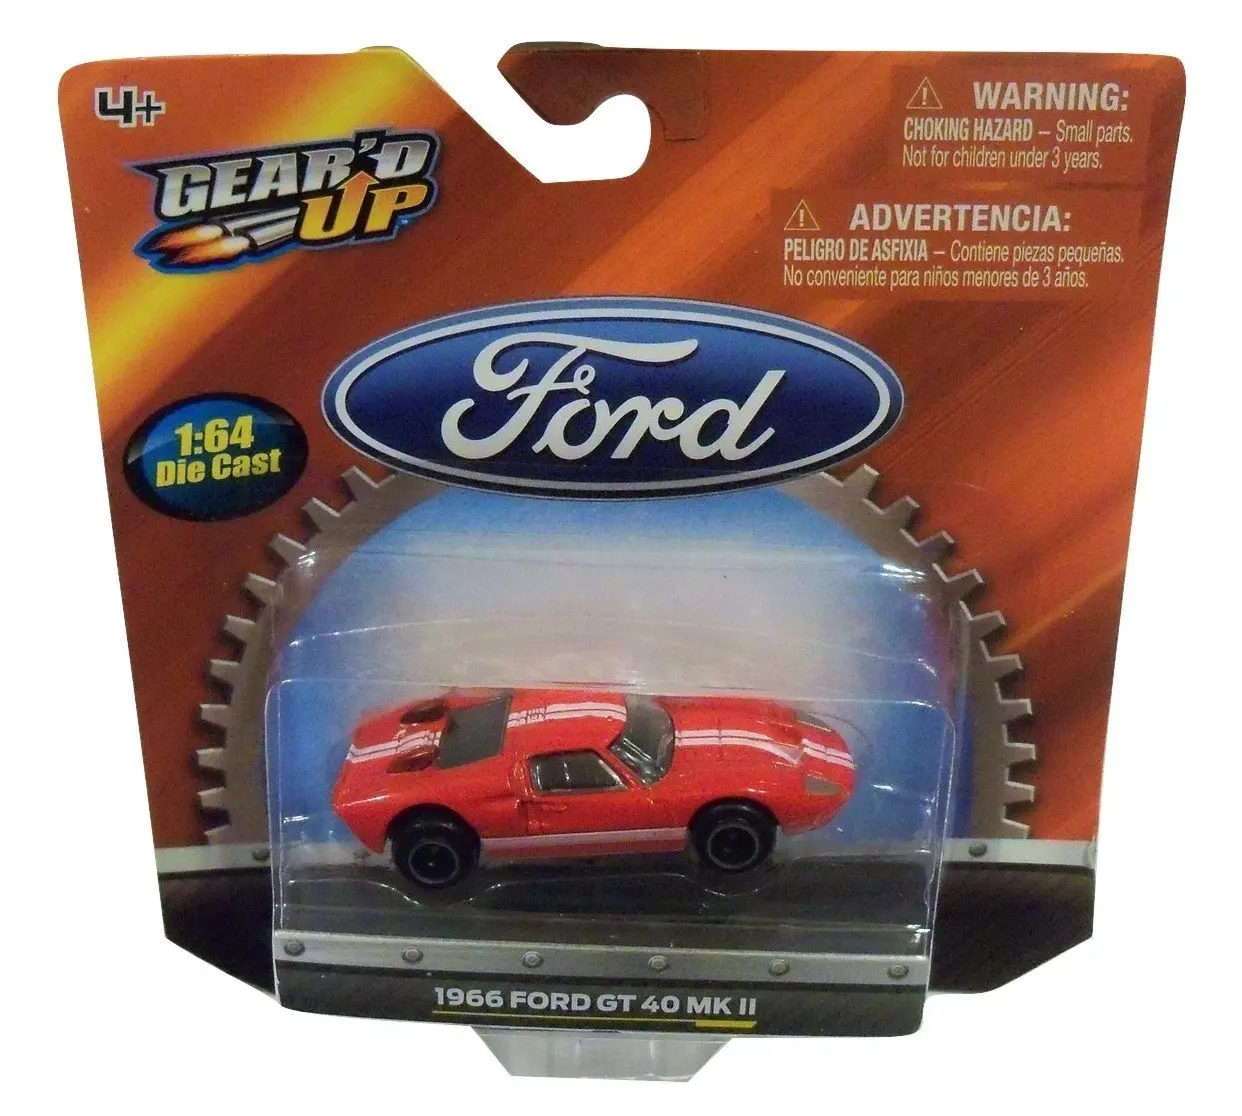 1976 FORD BAJA BRONCO All-Terrain Series 3 2016 Greenlight Collectibles 1:64 Scale Limited Edition Die-Cast Vehicle